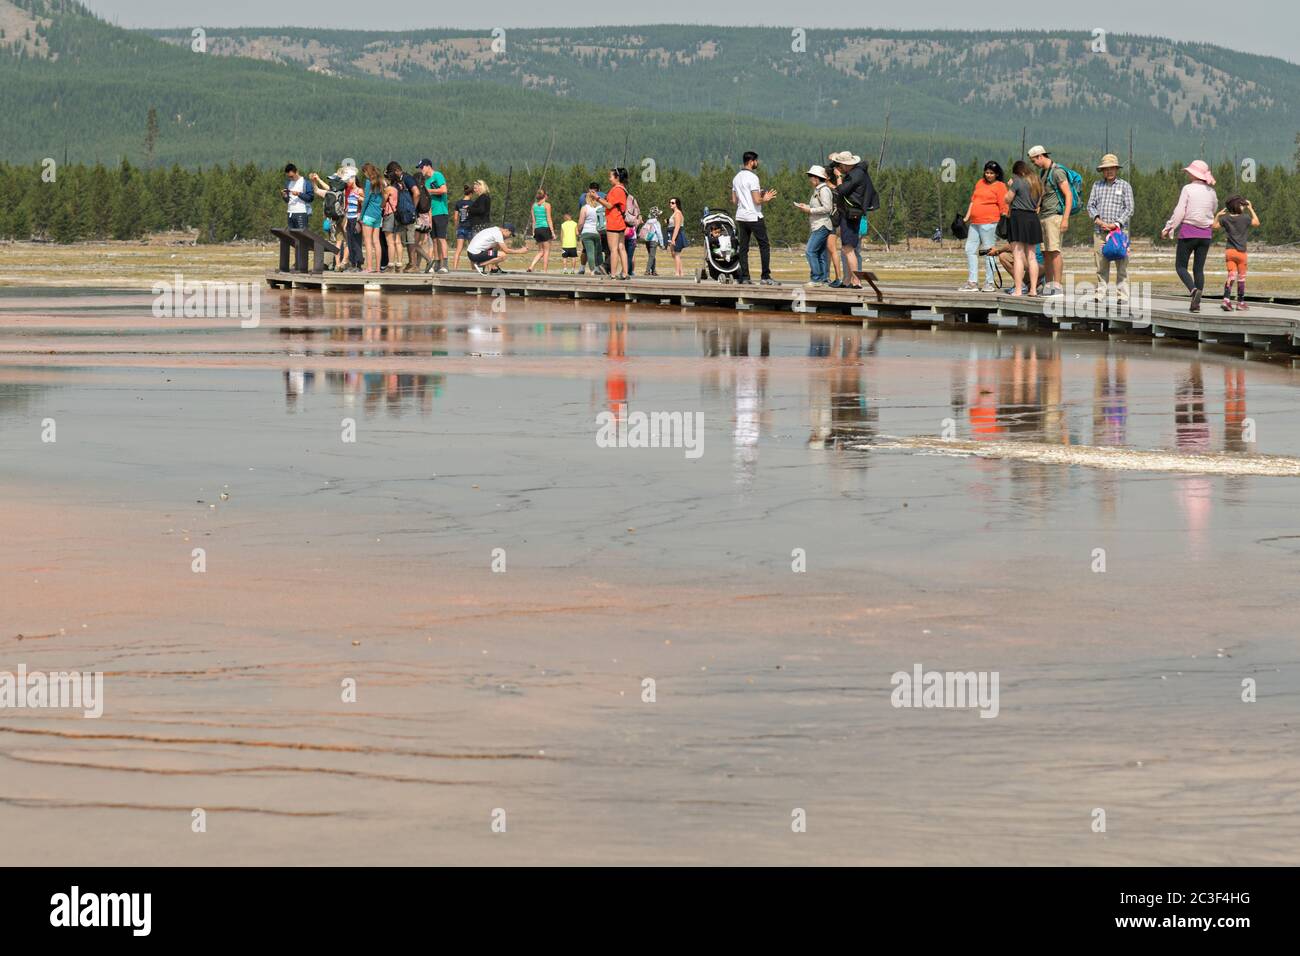 Tourists walk along the boardwalk at Grand Prismatic Spring the largest hot spring in Yellowstone National Park and third largest in the world. Grand Prismatic is about 250 by 300 feet in size, averages 160 degrees Fahrenheit and is up to 160 feet deep. The bright colors around the spring are from cyanobacteria mats. The Grand Prismatic Spring is part of the Midway Geyser Basin Excelsior Group in Yellowstone, Wyoming. Stock Photo